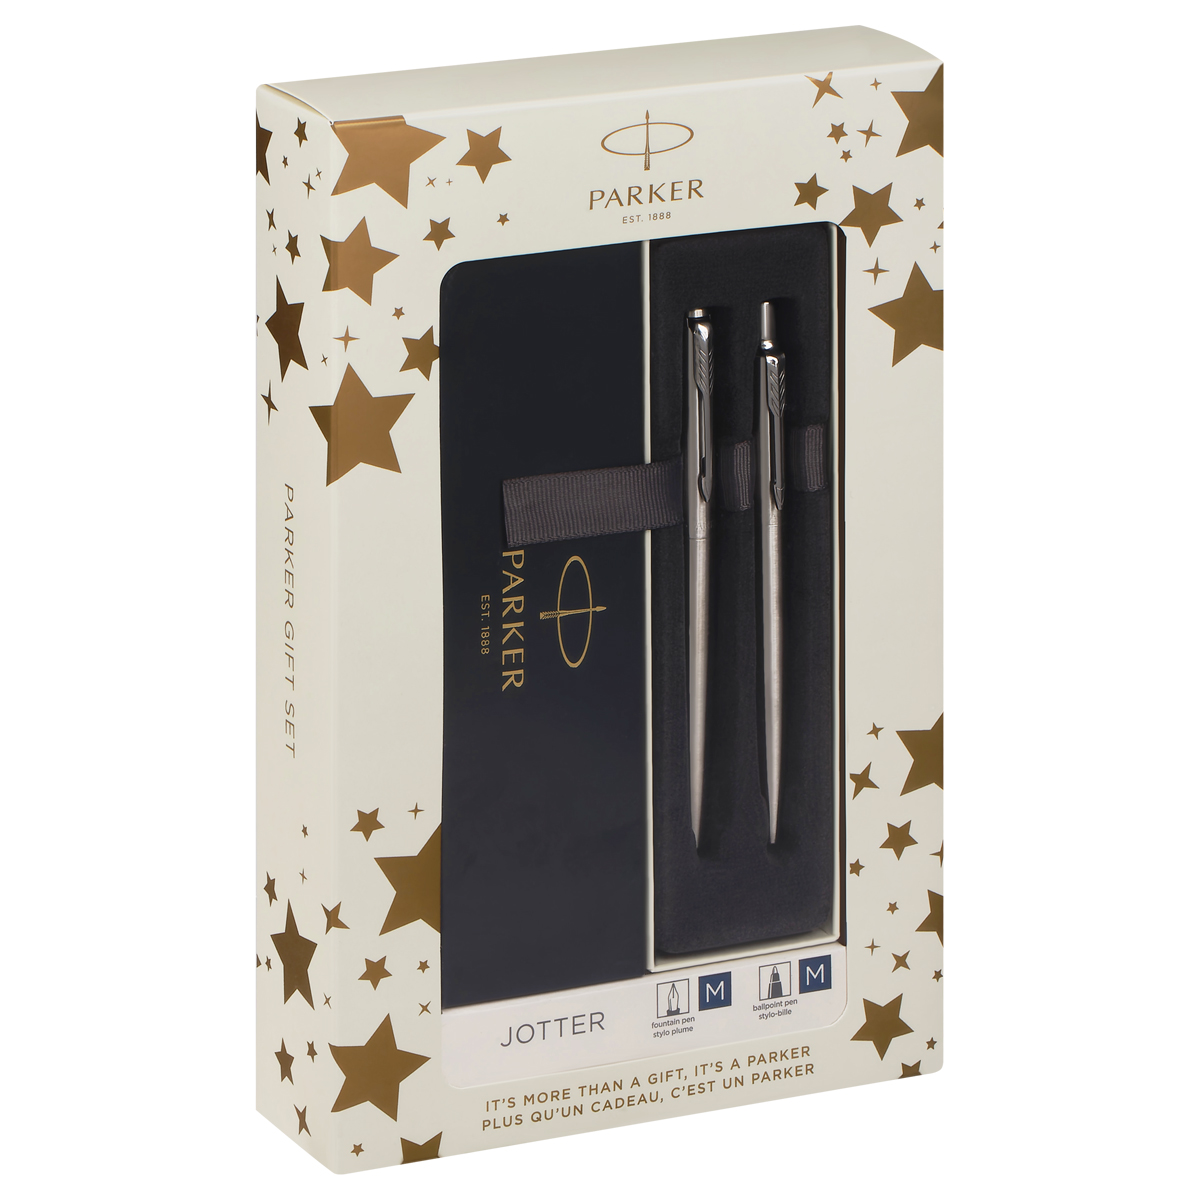  Parker "Jotter Stainless Steel CT":   1,0     1,0 ,   